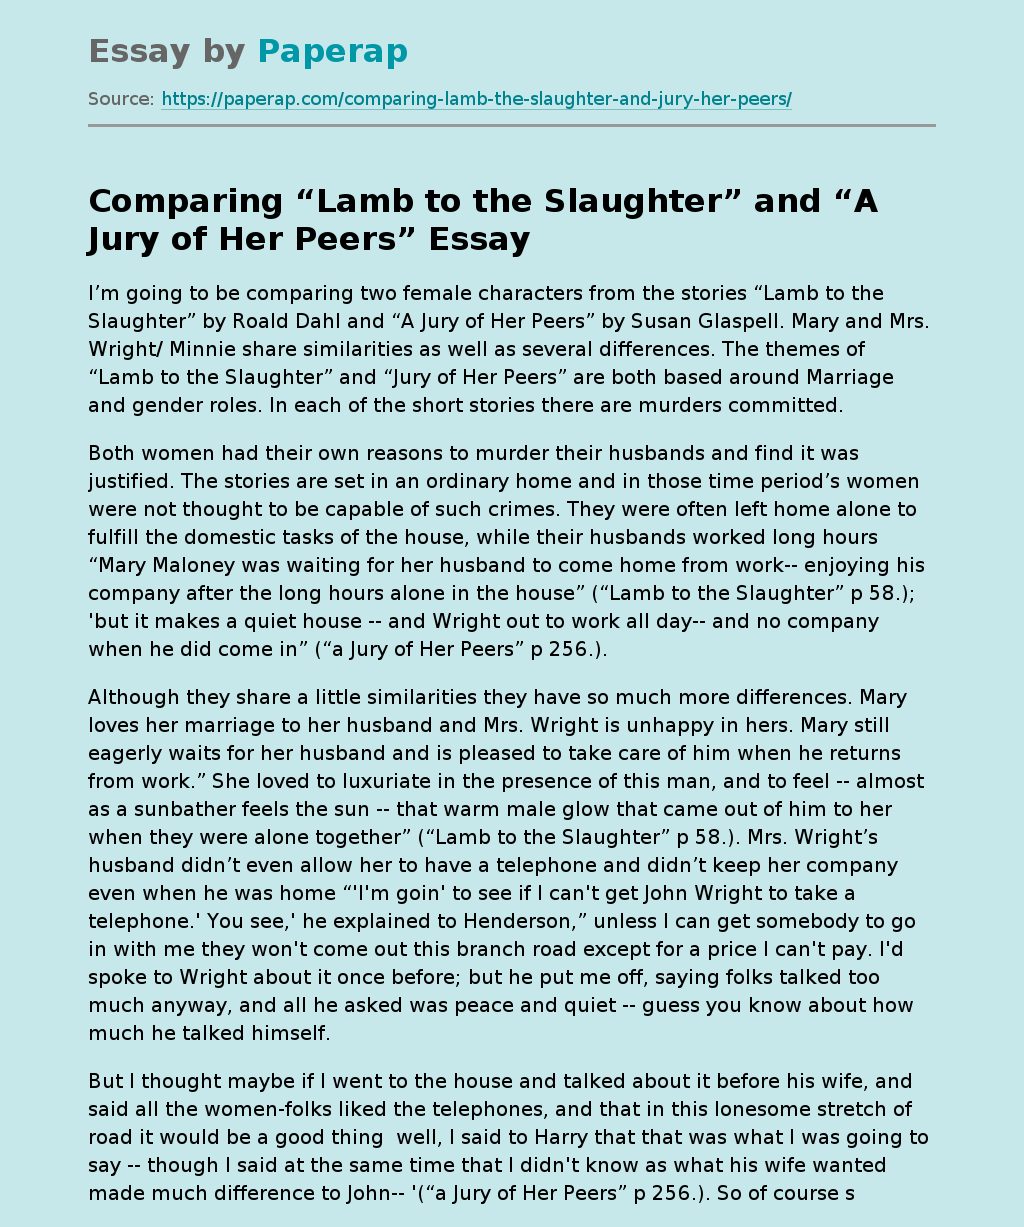 Comparing  “Lamb to the Slaughter” and “A Jury of Her Peers”